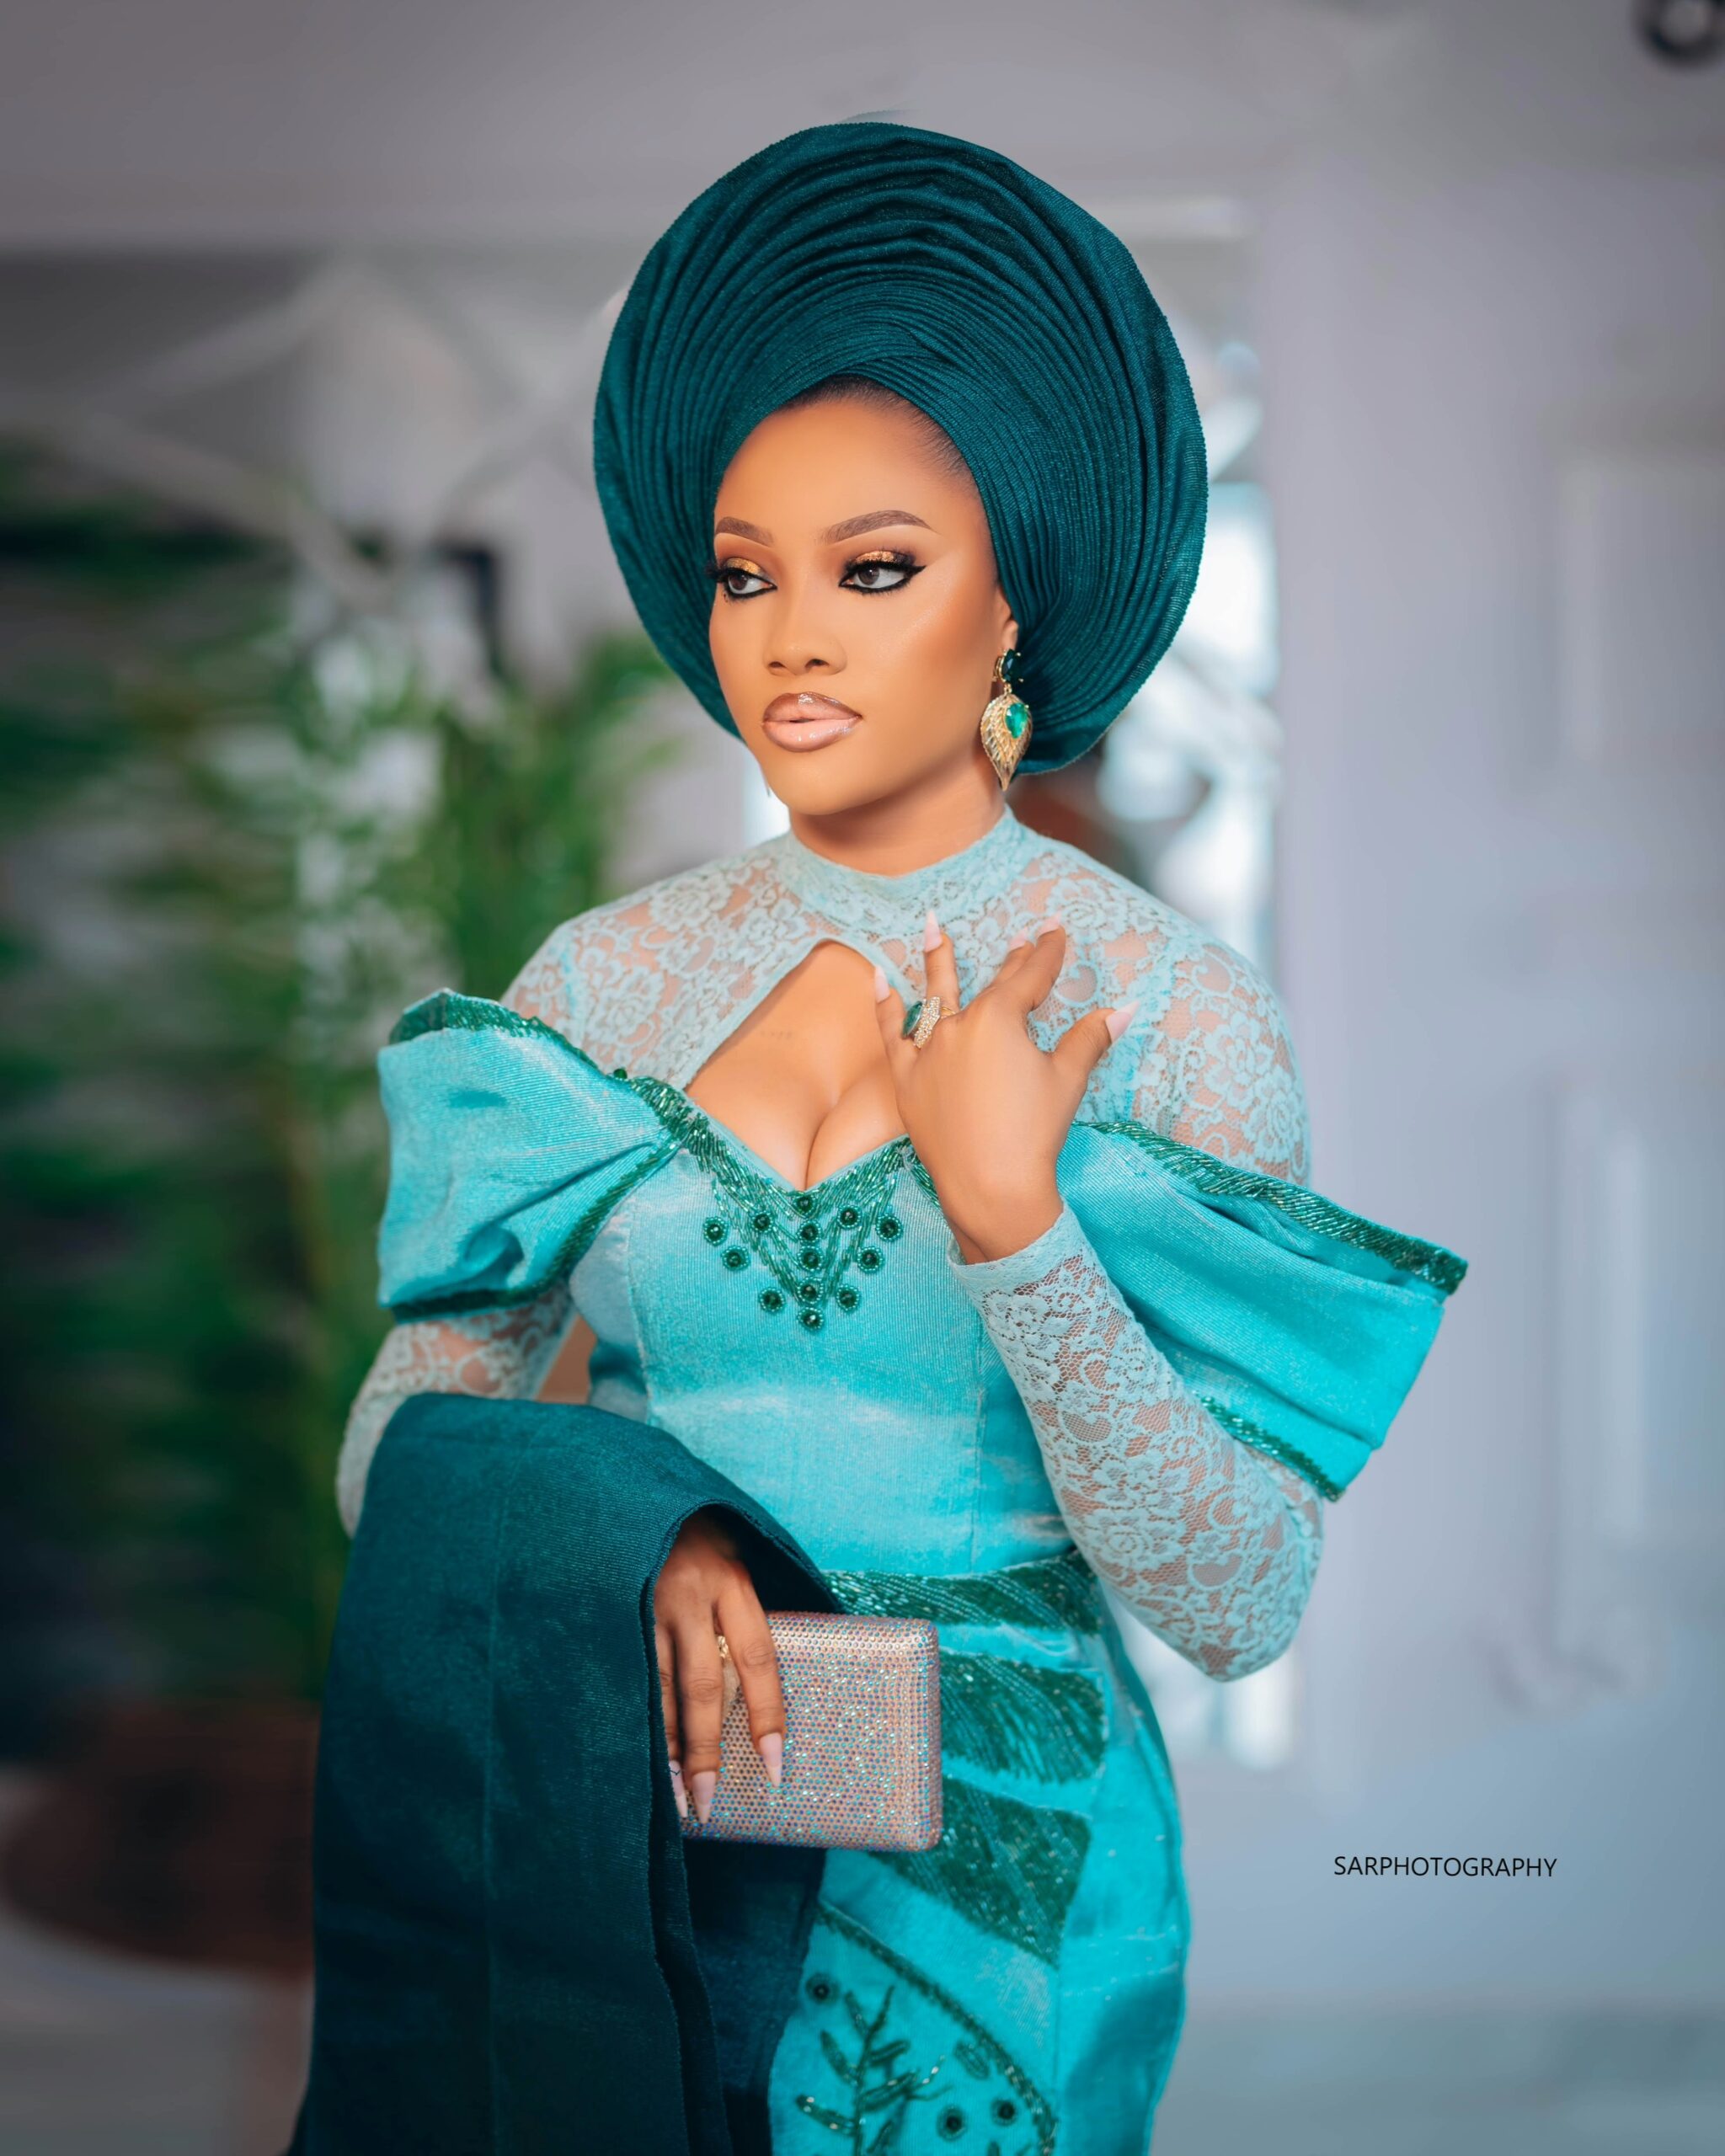 Opt For Elegance on Your Yoruba Trad With This Beauty Look